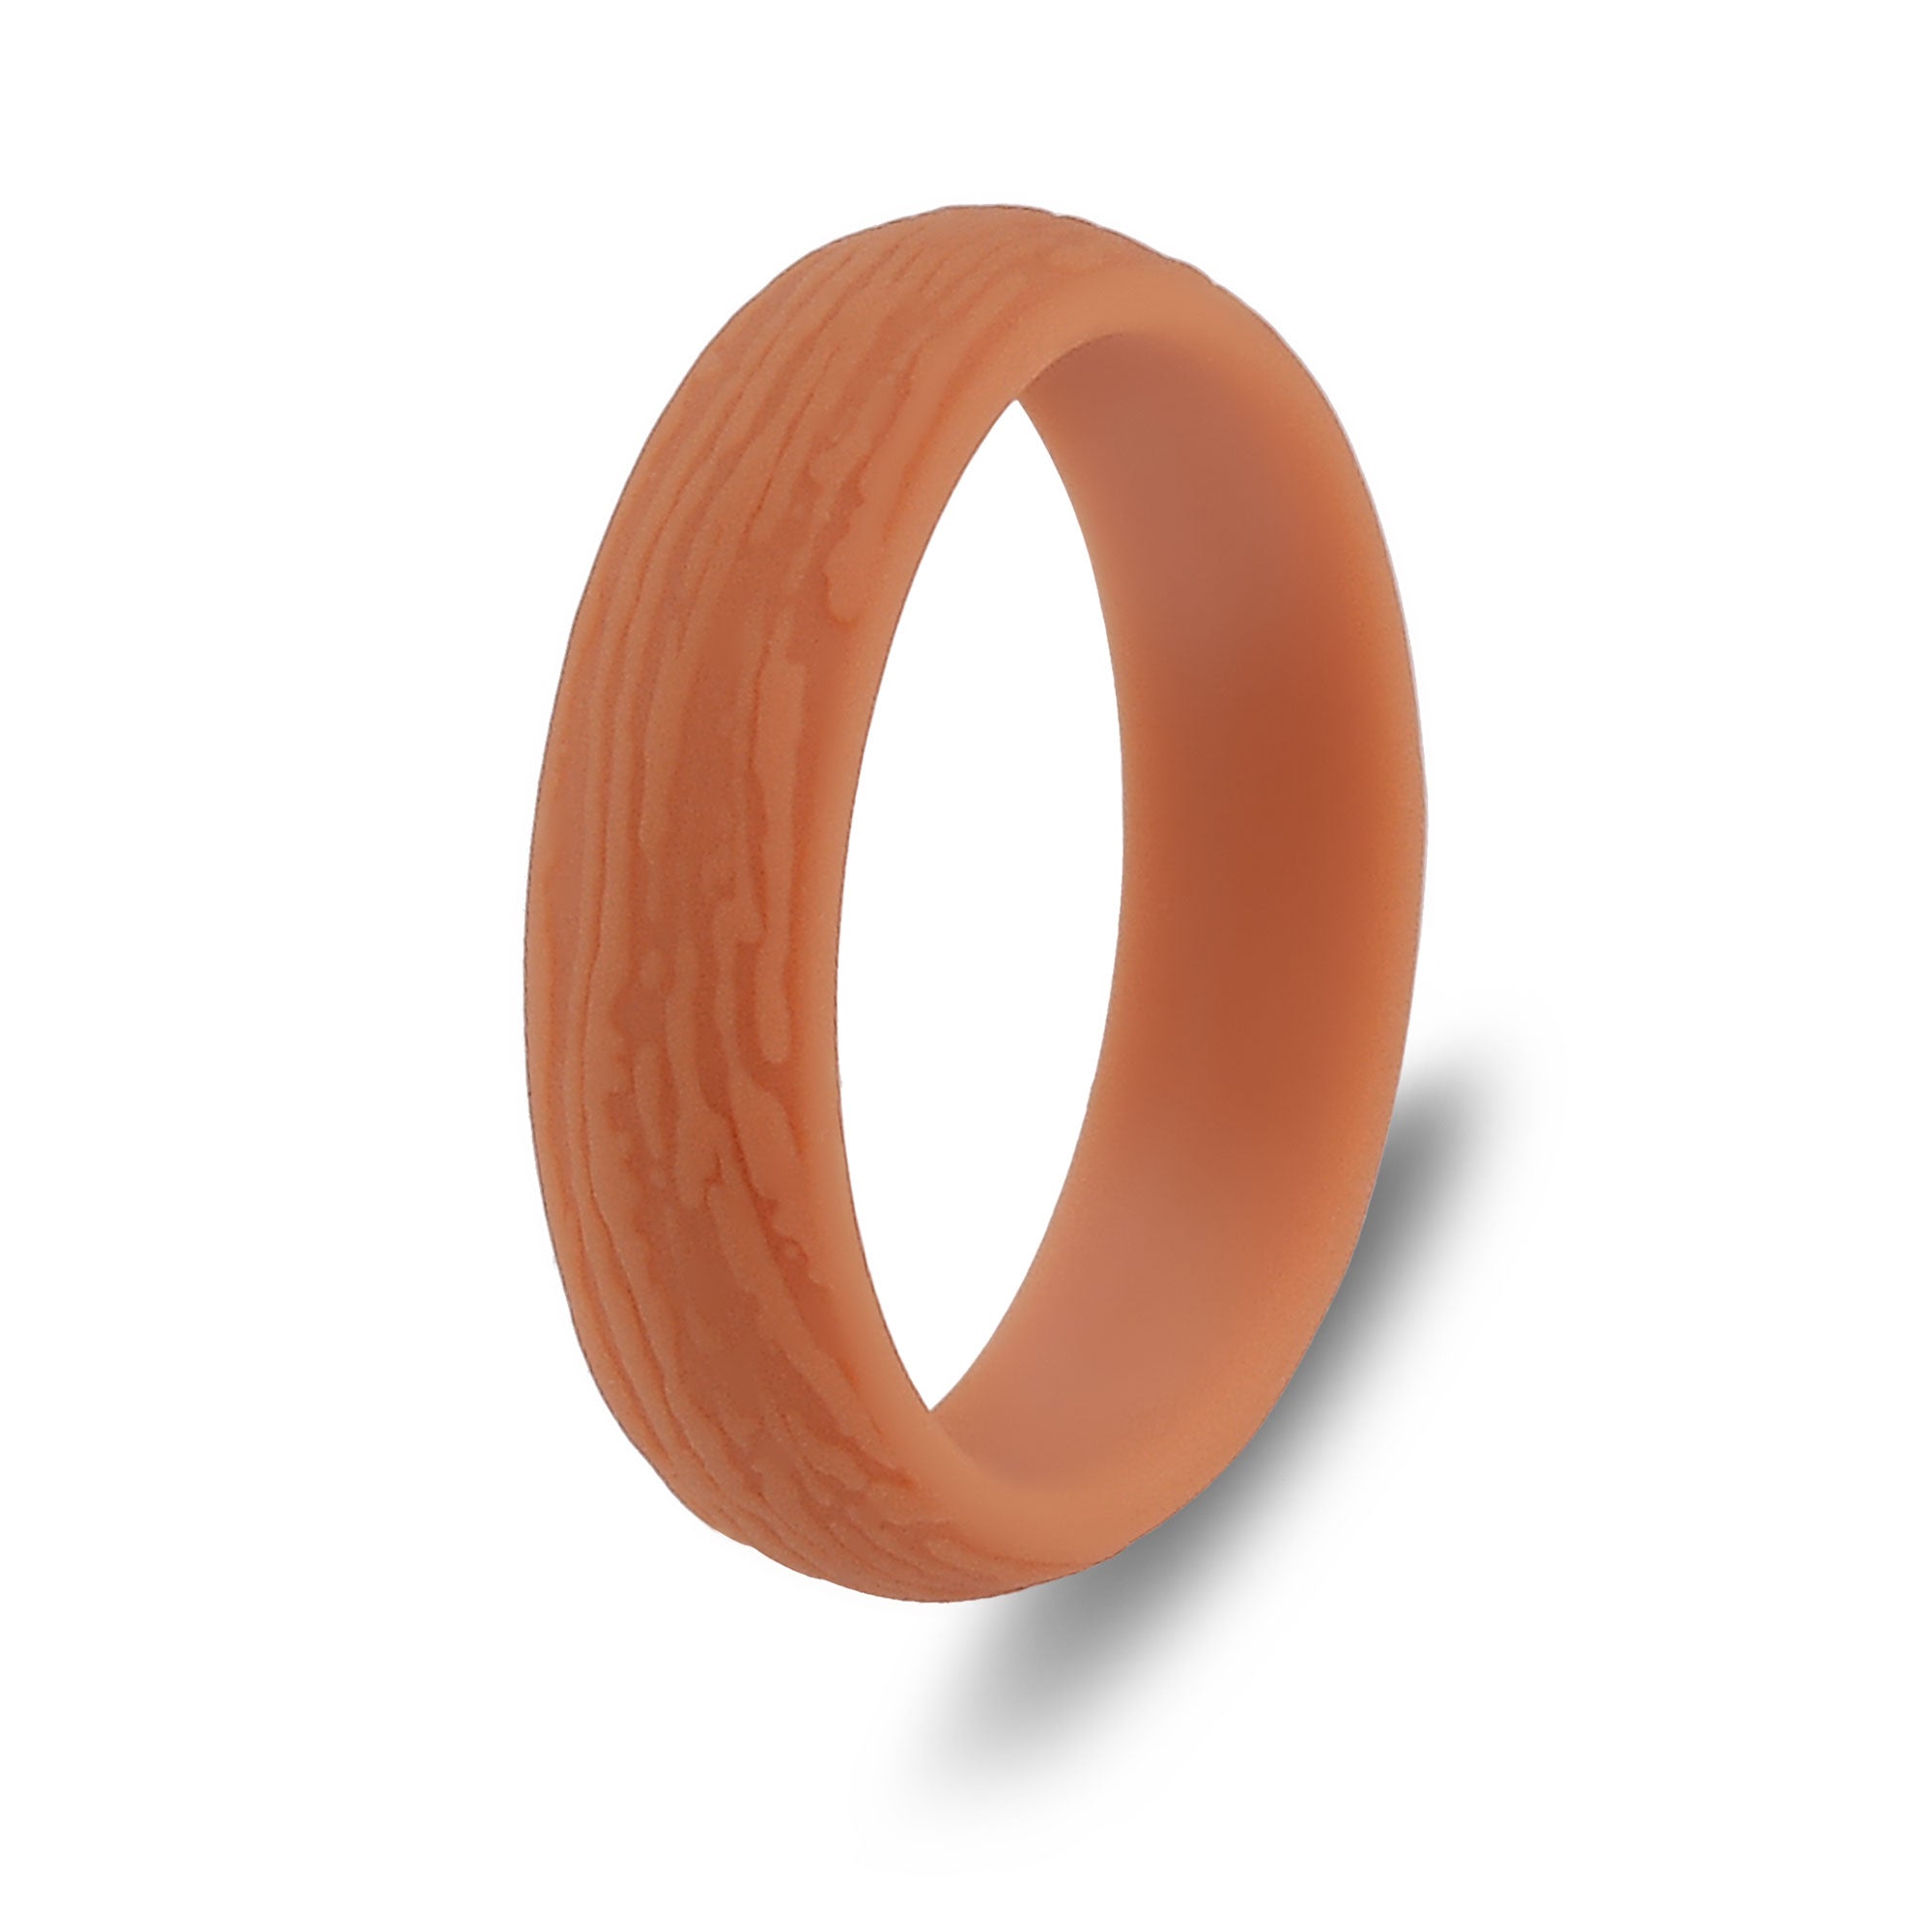 The Acorn - Silicone Ring